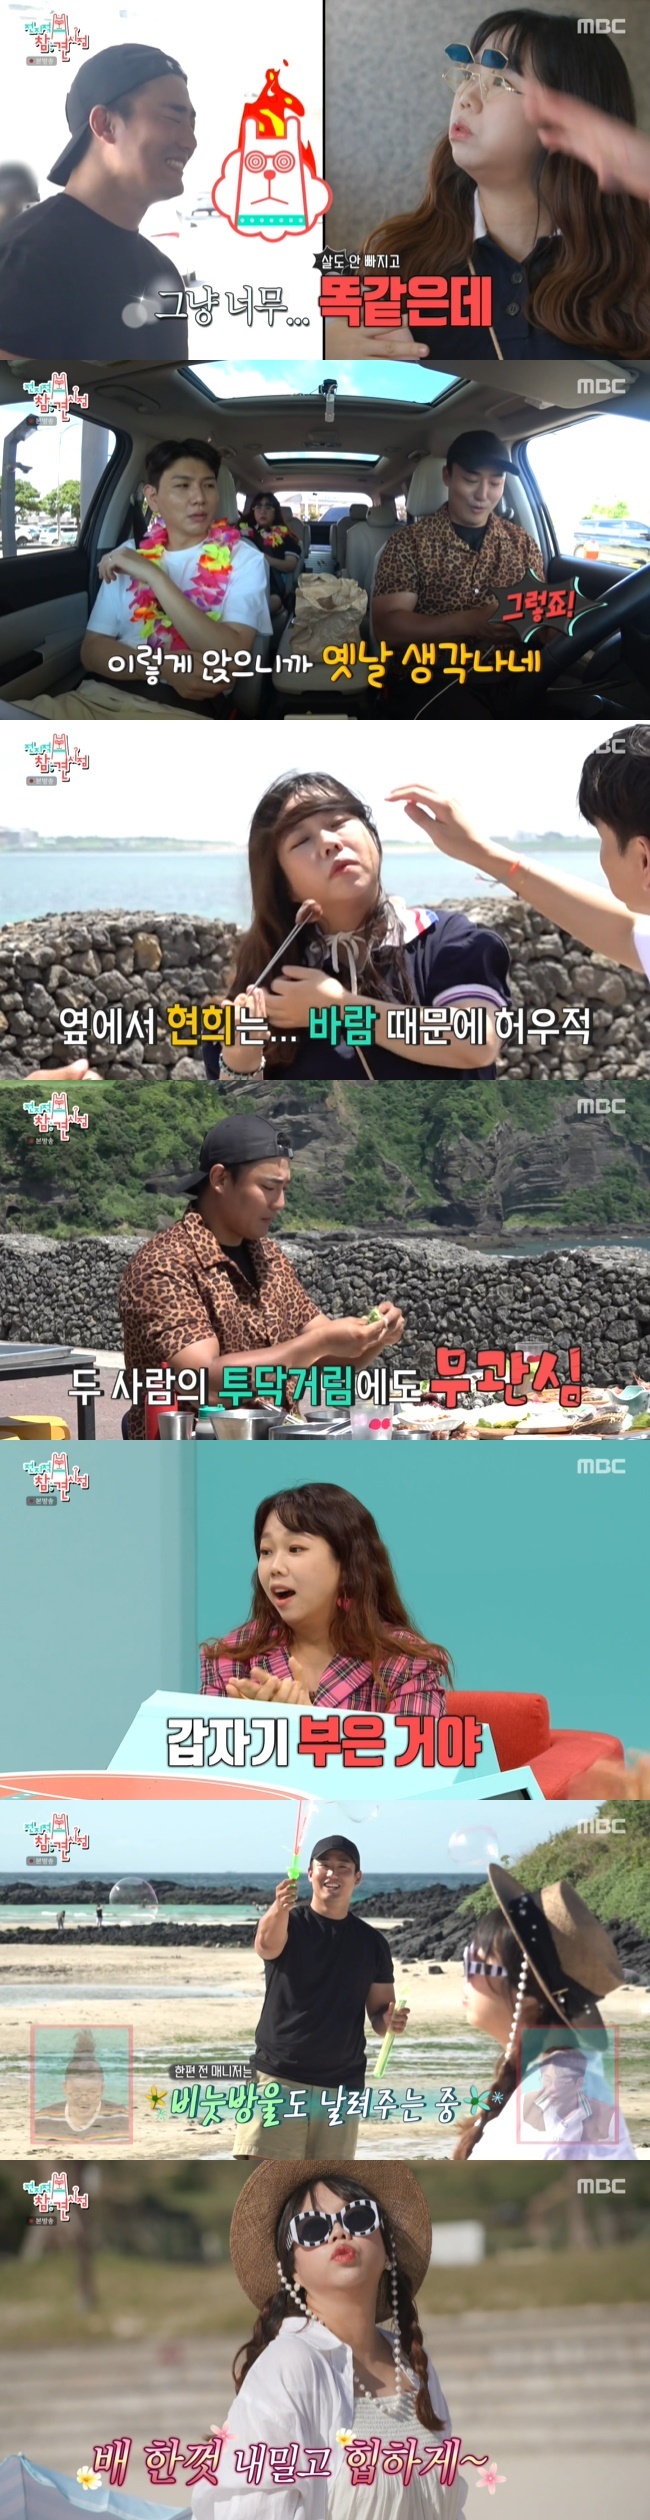 Lee Hyori and Lee Sang-soon appeared in Point of Omniscient Interfere for Hong Hyon-hee and Jason.In MBCs Point of Omniscient Interfere, which was broadcast on July 16, Hong Hyon-hee and Jasons Jeju Island also revealed the process of shooting a full-length picture.The Hong Hyon-hee, Jason couple, who also went on a prenatal trip to Jeju Island, met the former manager, who quit Manager and stayed at Jeju Island and was resting.The Hong Hyon-hee couple were baffled when Manager, who had quit work to return to trainers, appeared the same as before without losing weight.The former Manager took the couple to a restaurant with a view of Seongsan Ilchulbong, claiming to be a guide; the Hong Hyon-hees ate sashimi and meat, struggling with the heat, wind and the like.The Hong Hyon-hee couple, who admired the taste but could not overcome the heat, laughed at the moment when they woke up and laughed at the storm inhalation without worrying.At the studio, Hong Hyon-hee said, We think that Jeju Island is going to go to the low salt for 3 ~ 4 days.As soon as I ate pork belly, I ate too much salted ribs and I could not jam, and I suddenly poured it, Disclosure said.The Hong Hyon-hee couple, who watched the accommodation where the former manager stayed, went to the beach to take a full picture.In the heat wave warning, the three people made a mistake and photographed the picture, followed by Hong Hyon-hee, who prepared to take a picture with the concept of revealing only his face and ship on the sandy beach.Hong Hyon-hee, who unveiled the round-up boat, said, I did not have a boat, I was originally out of the boat.Even after Hong Hyon-hee struggled to lie in the sand pit, the melancholy music flowed out of the marketplace and laughed.Jason, who took a picture of his wife enthusiastically in the heat, showed a friendly appearance, shaking the sand in the Hong Hyon-hee navel.After completing the filming at the end of the twists and turns, Hong Hyon-hee said, I live in Jeju Island and my sister lives.The sister whom Hong Hyon-hee spoke to was Lee Hyori; Lee Hyori visited the Hong Hyon-hee couples quarters with her husband Lee Sang-soon.Lee Hyori, who transformed into an extraordinary Wolfcut Hair, said, Im going to fold the broadcast now.I cut it off with that kind of mind, but I got in touch with you. Hes a haircut.I think I live with my younger brother, he said.When Hong Hyon-hee praised this hair is not easy to fit, Lee Sang-soon boasted that Hyori is pretty no matter what.The former Manager, who had his mouth shut and even backed off as soon as he saw Lee Hyori, was sharply nervous about Lee Hyoris aura.Lee Hyori said, I would have met a lot of entertainers while following Hyun Hee. But he said, Have you met this class yet?Lee Hyori, who was watching Hong Hyon-hees full-scale photos, mentioned the fact that the Hong Hyon-hee couple had Gifted the resonance in the photo exhibition before Jason came out with a resonance Gift.Lee Hyori said, If you have something in your life, you give someone to your side.I told him I should write it for me this time, but he said he would eat only one, he said.Lee Sang-soon did not like the resonance very much, but Lee Hyori was so caring that he was interested, Confessions said.Lee Sang-soon said, I have to go to the broadcasting now and I am tired, so I can not do it because I want to have a resonance.So I texted him and said, Do not you have to have a public diagnosis. Jason gave Lee Hyori and Lee Sang-soon a fair resonance, while Hong Hyon-hee gave only Lee Hyori a massage five days to Gift.Lee Sang-soon also gave Lee Hyoris oil a look and laughed.Lee Hyori and his wife were impressed by the side dishes and ingredients, saying that they would make a meal in return.